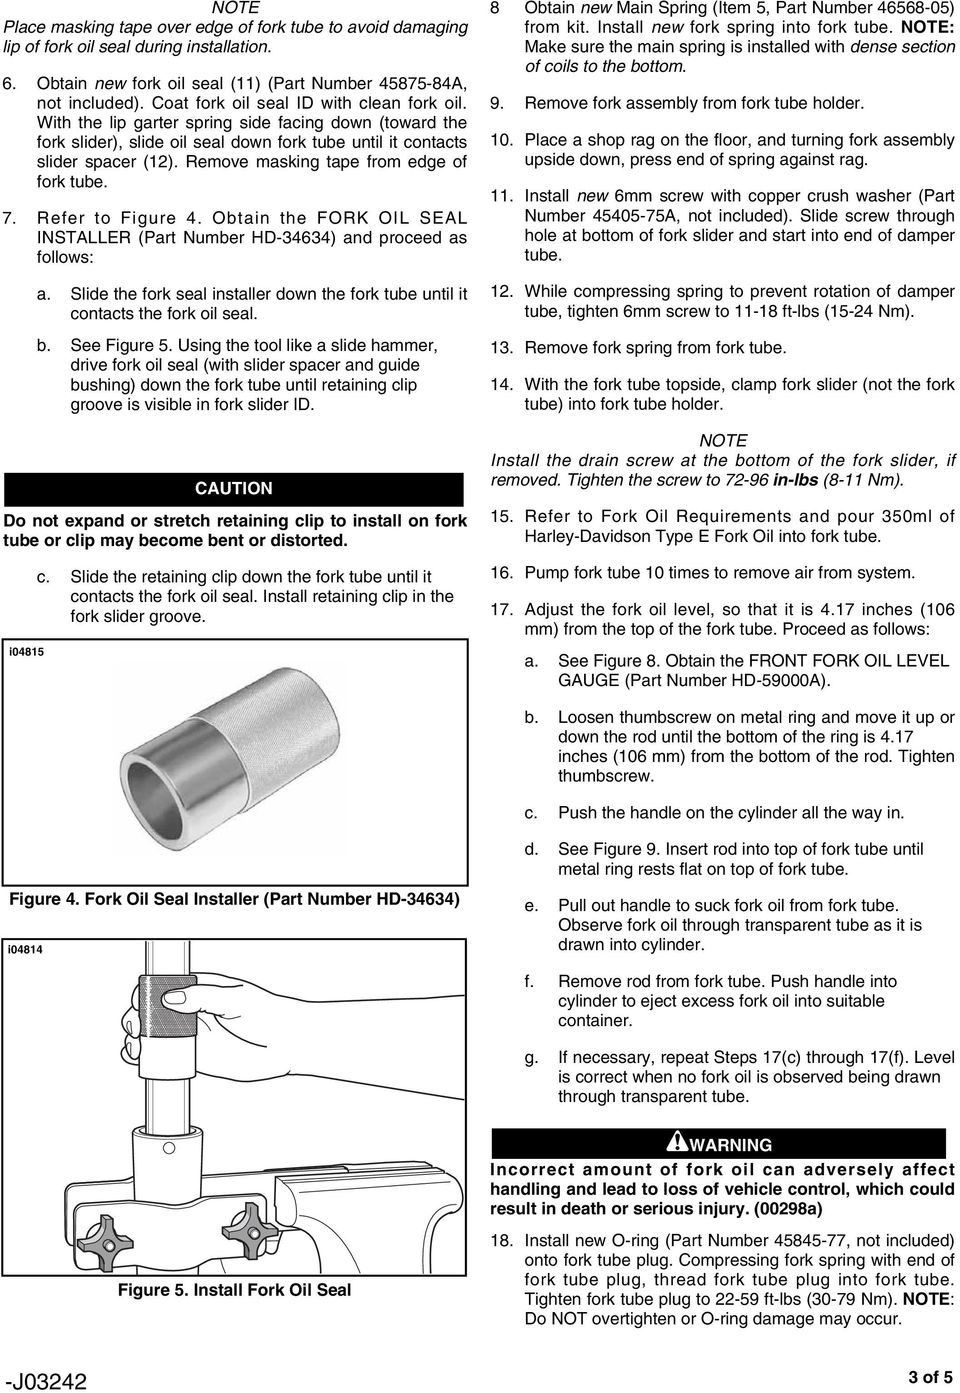 Remove masking tape from edge of fork tube. 7. Refer to Figure 4. Obtain the FORK OIL SEAL INSTALLER (Part Number HD-464) and proceed as follows: a.